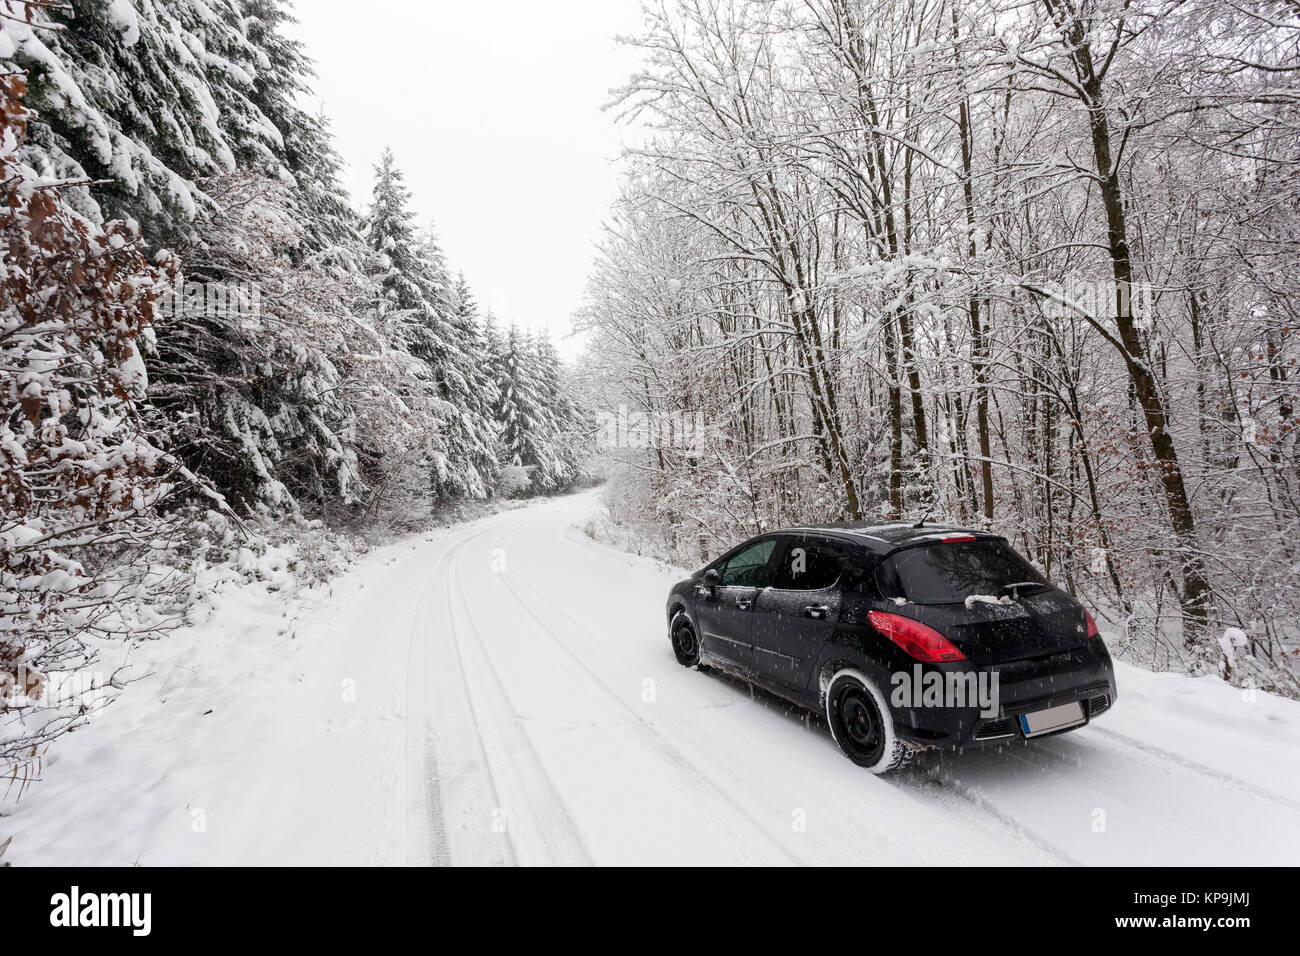 Car on a snow covered road in a snowy white winter forest in Germany Stock Photo